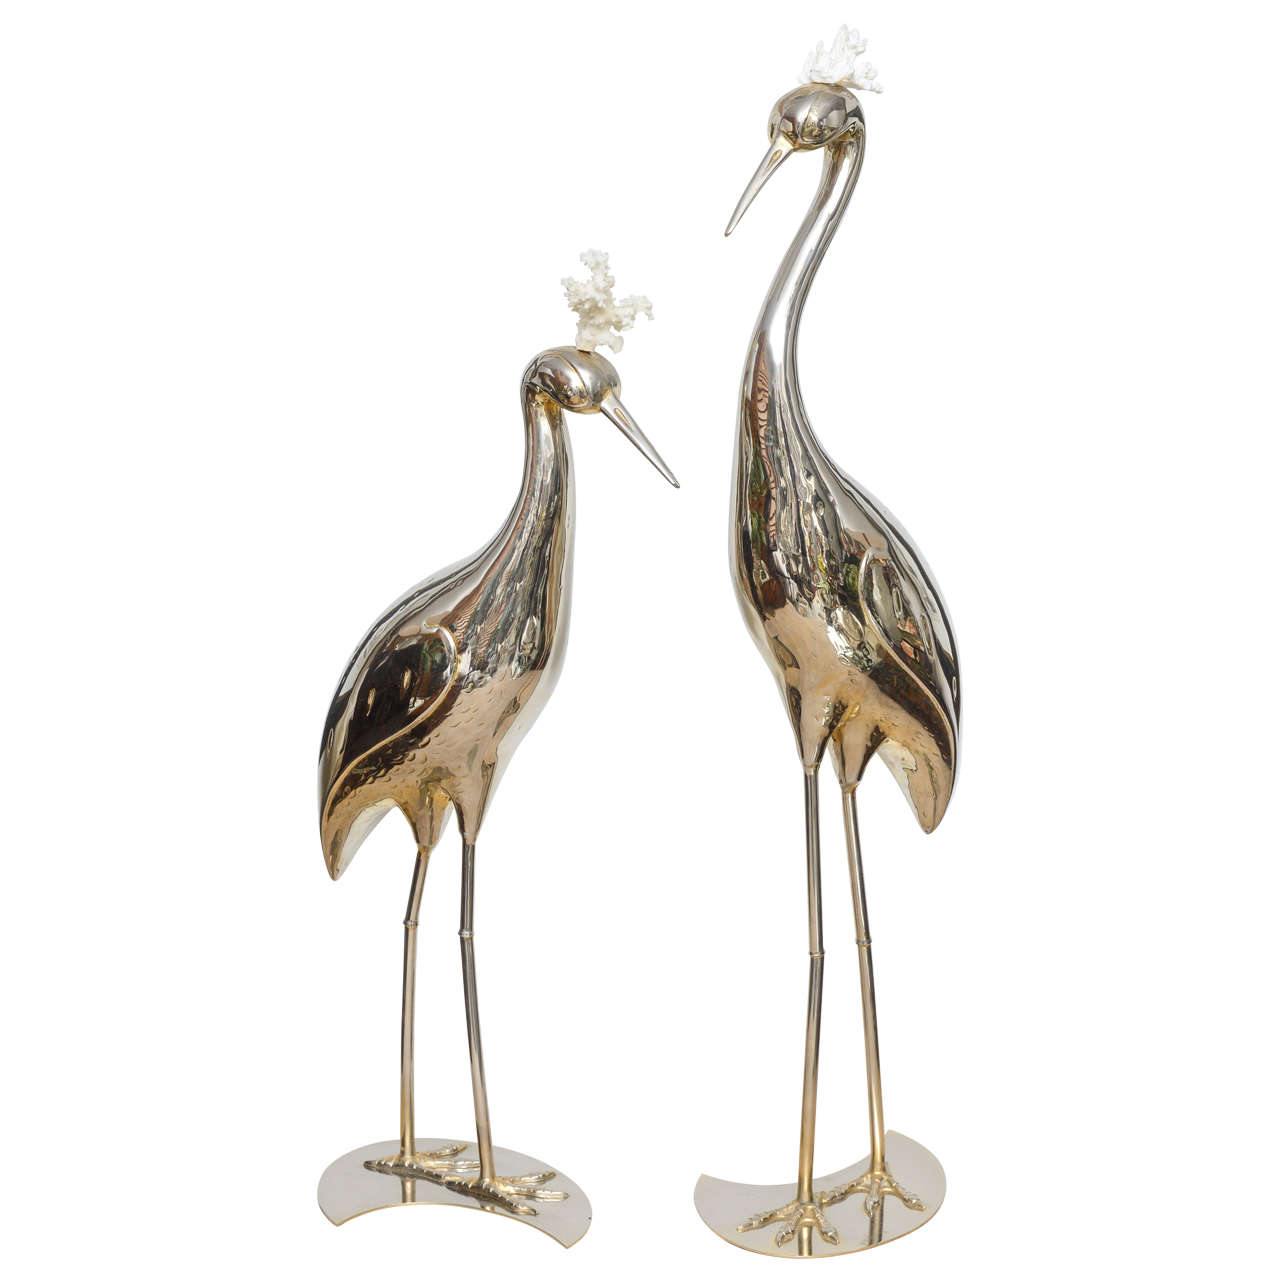 Pair of Vintage Italian Silver Plated Cranes